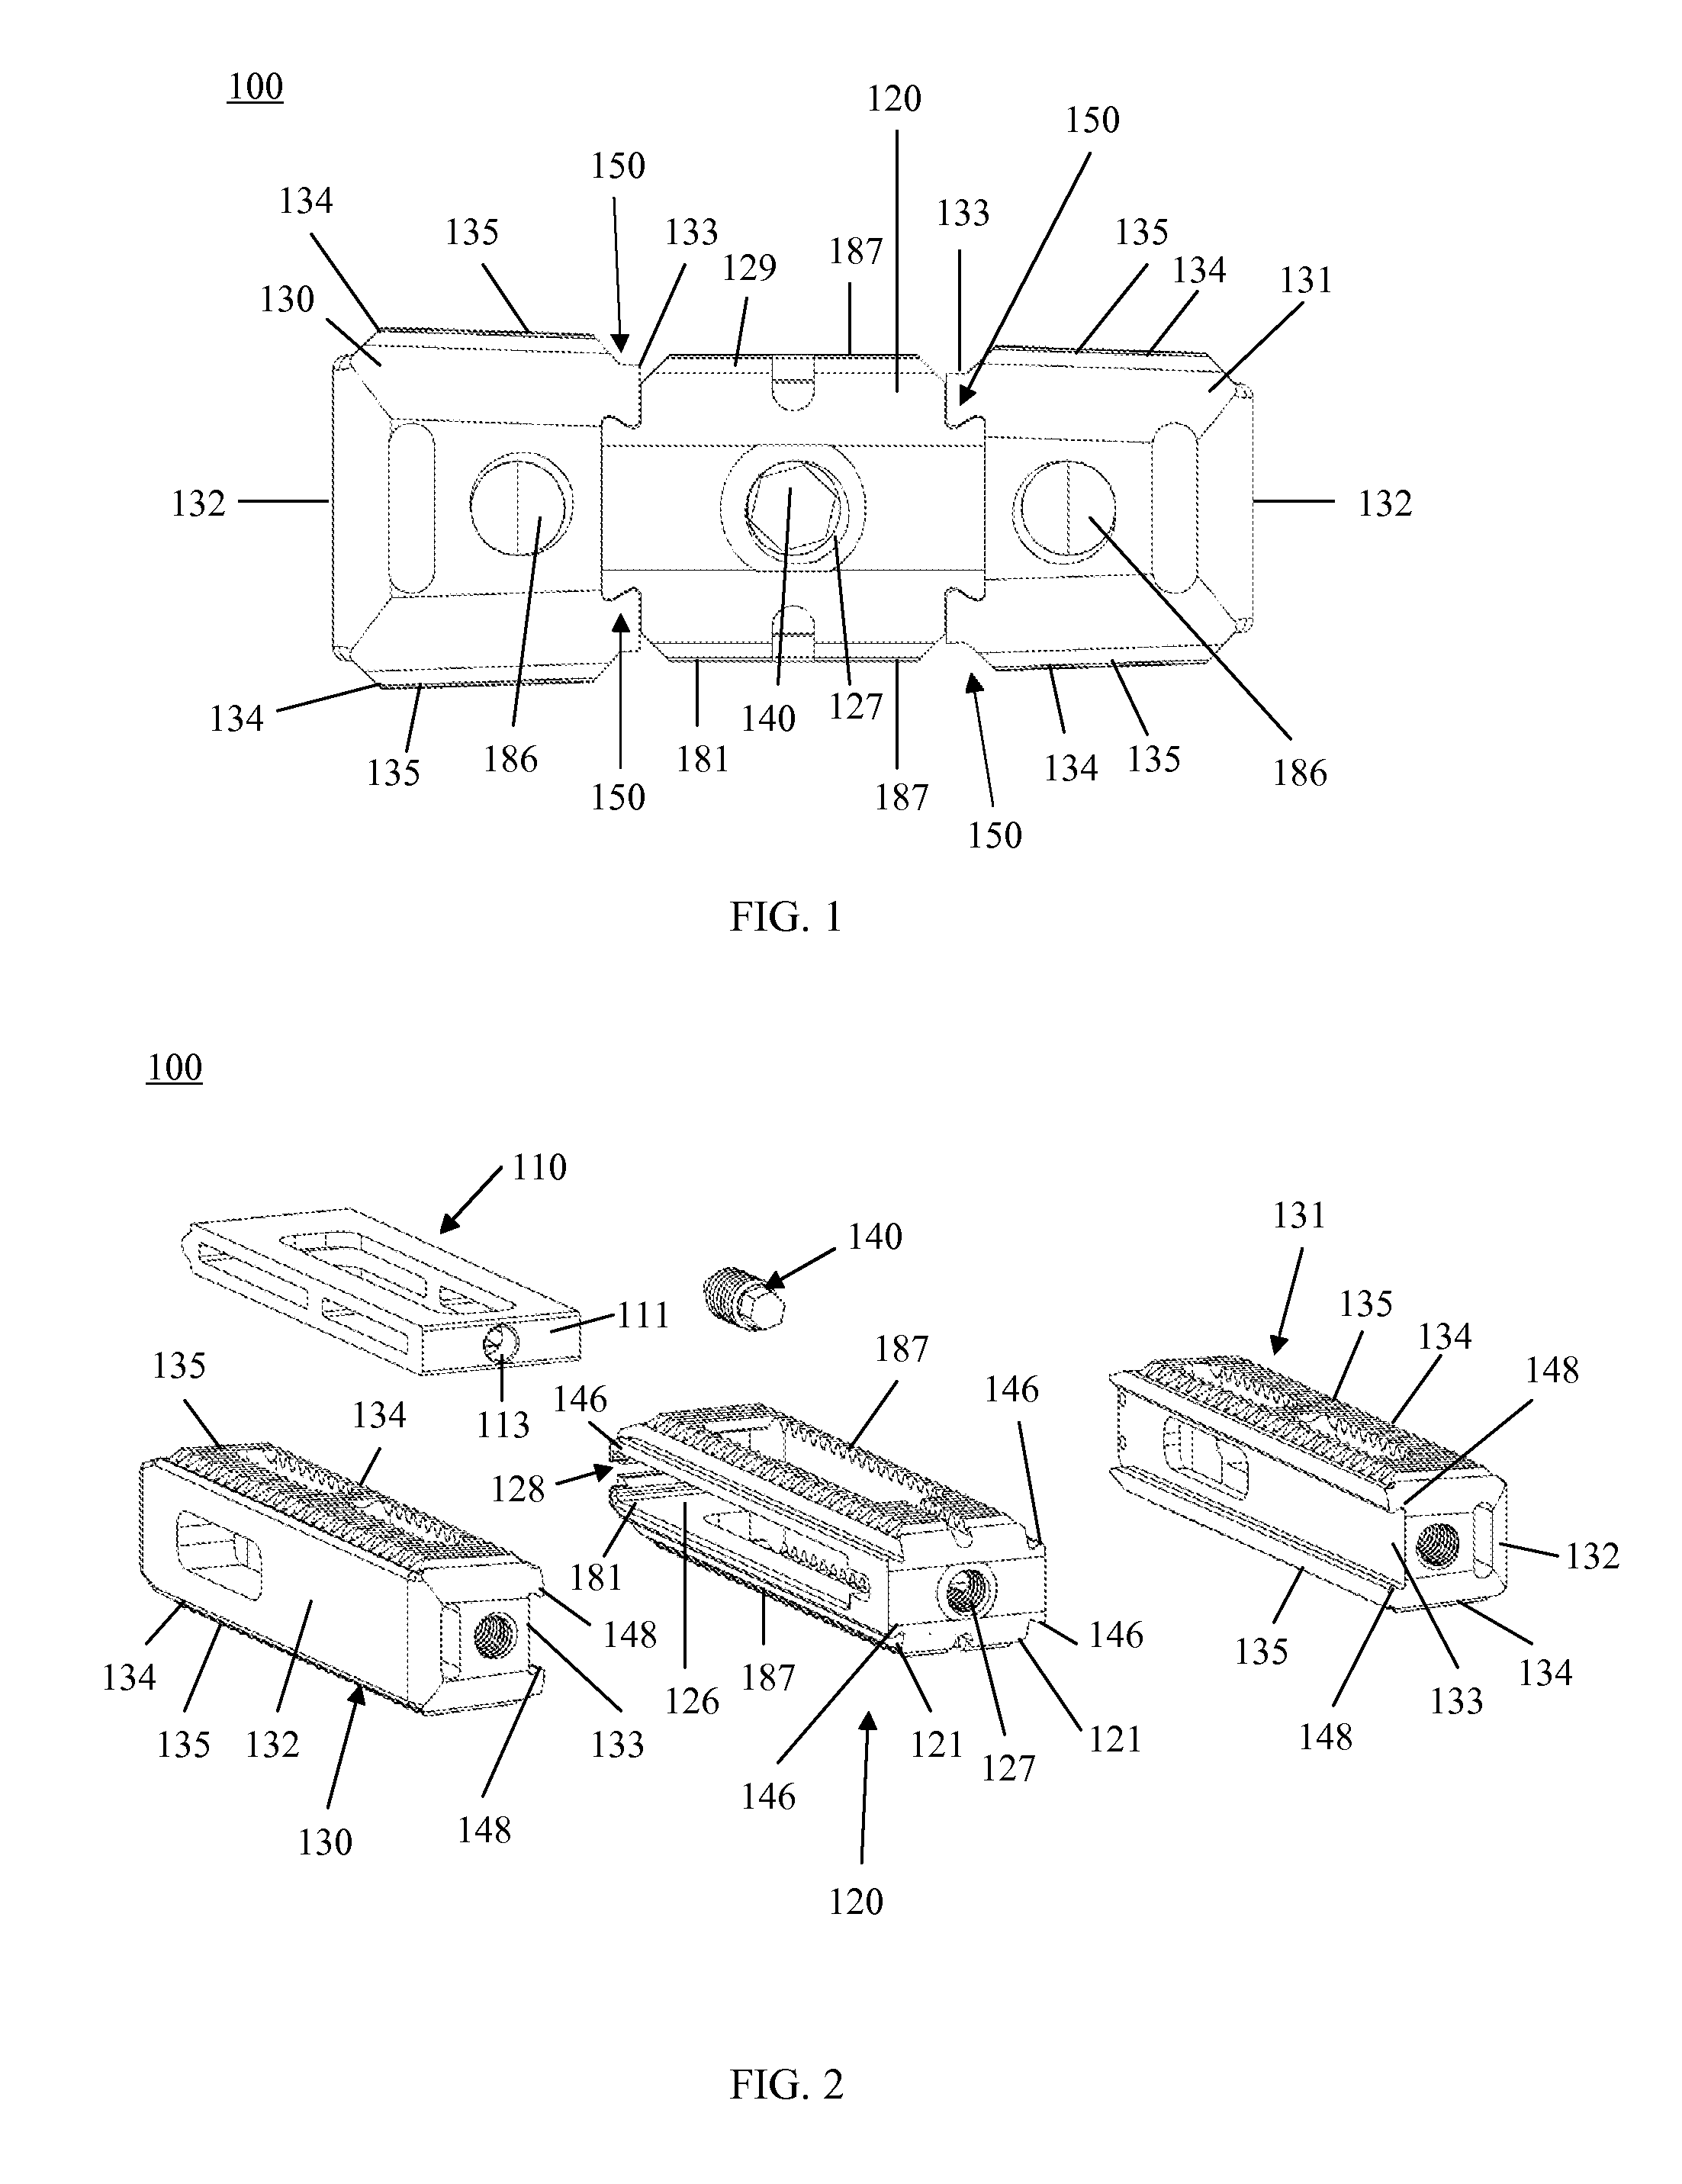 Expandable tissue space implant and method of use